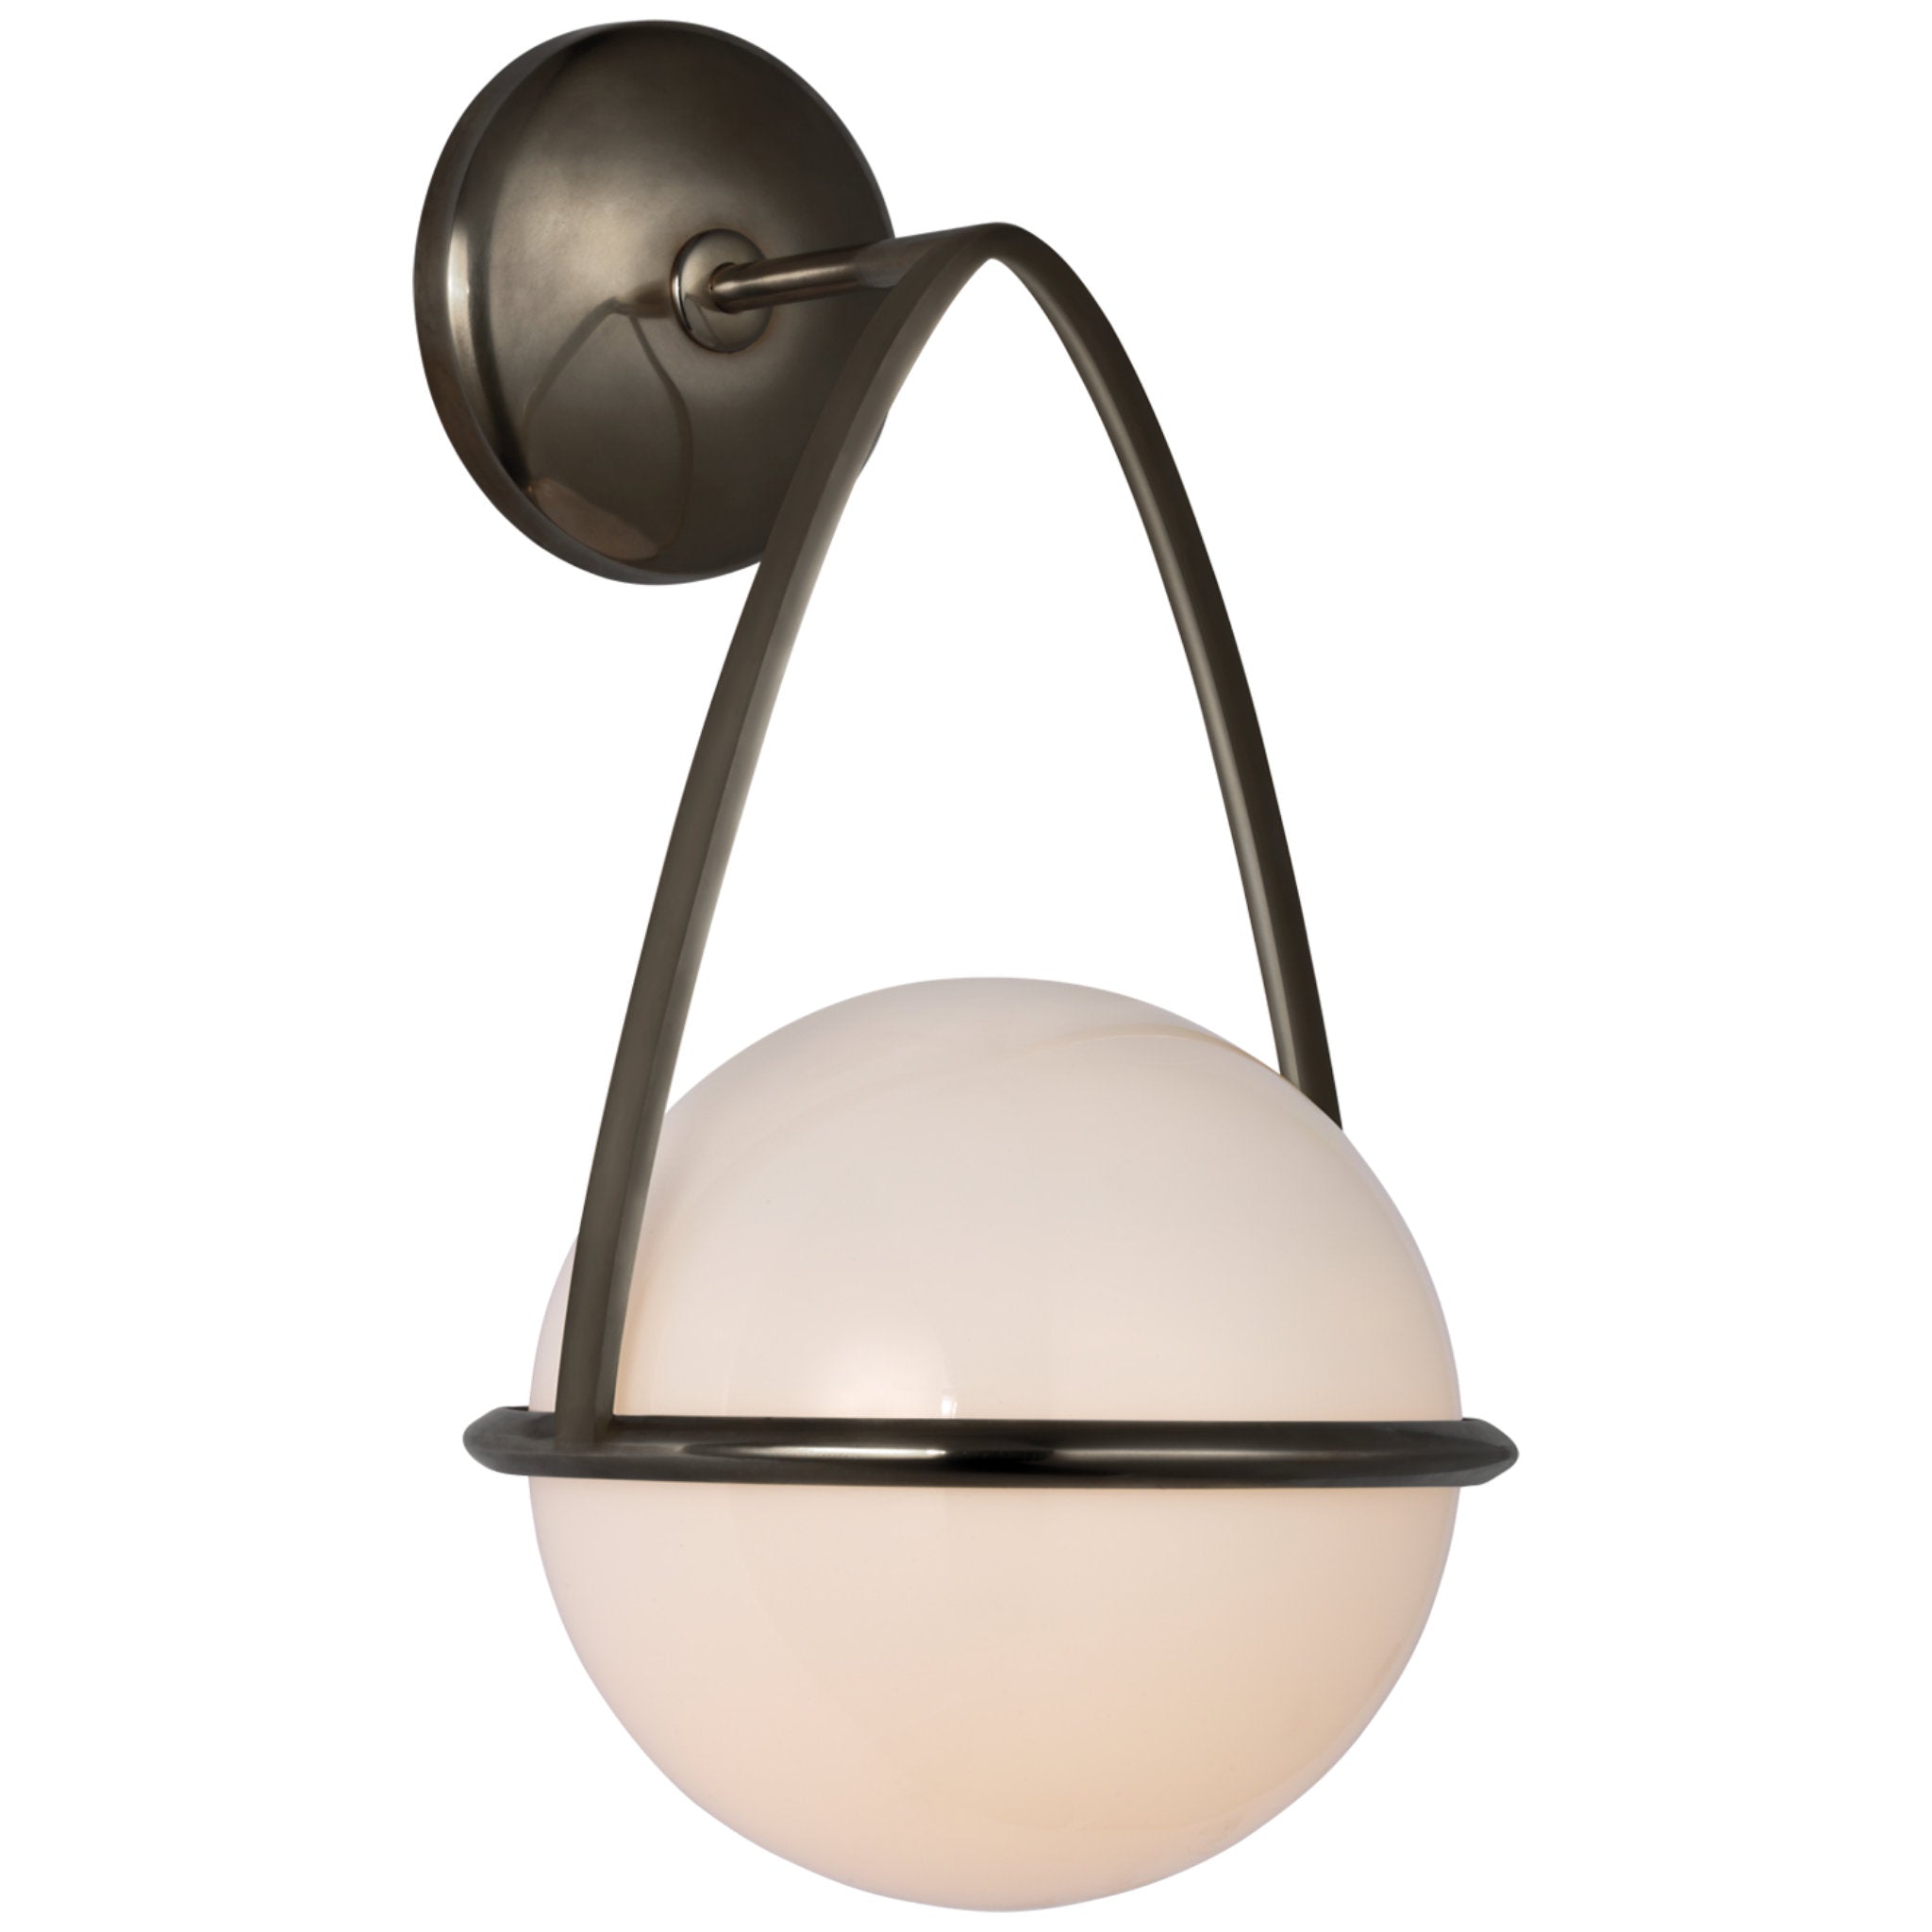 AERIN Lisette Bracketed Sconce in Bronze with White Glass